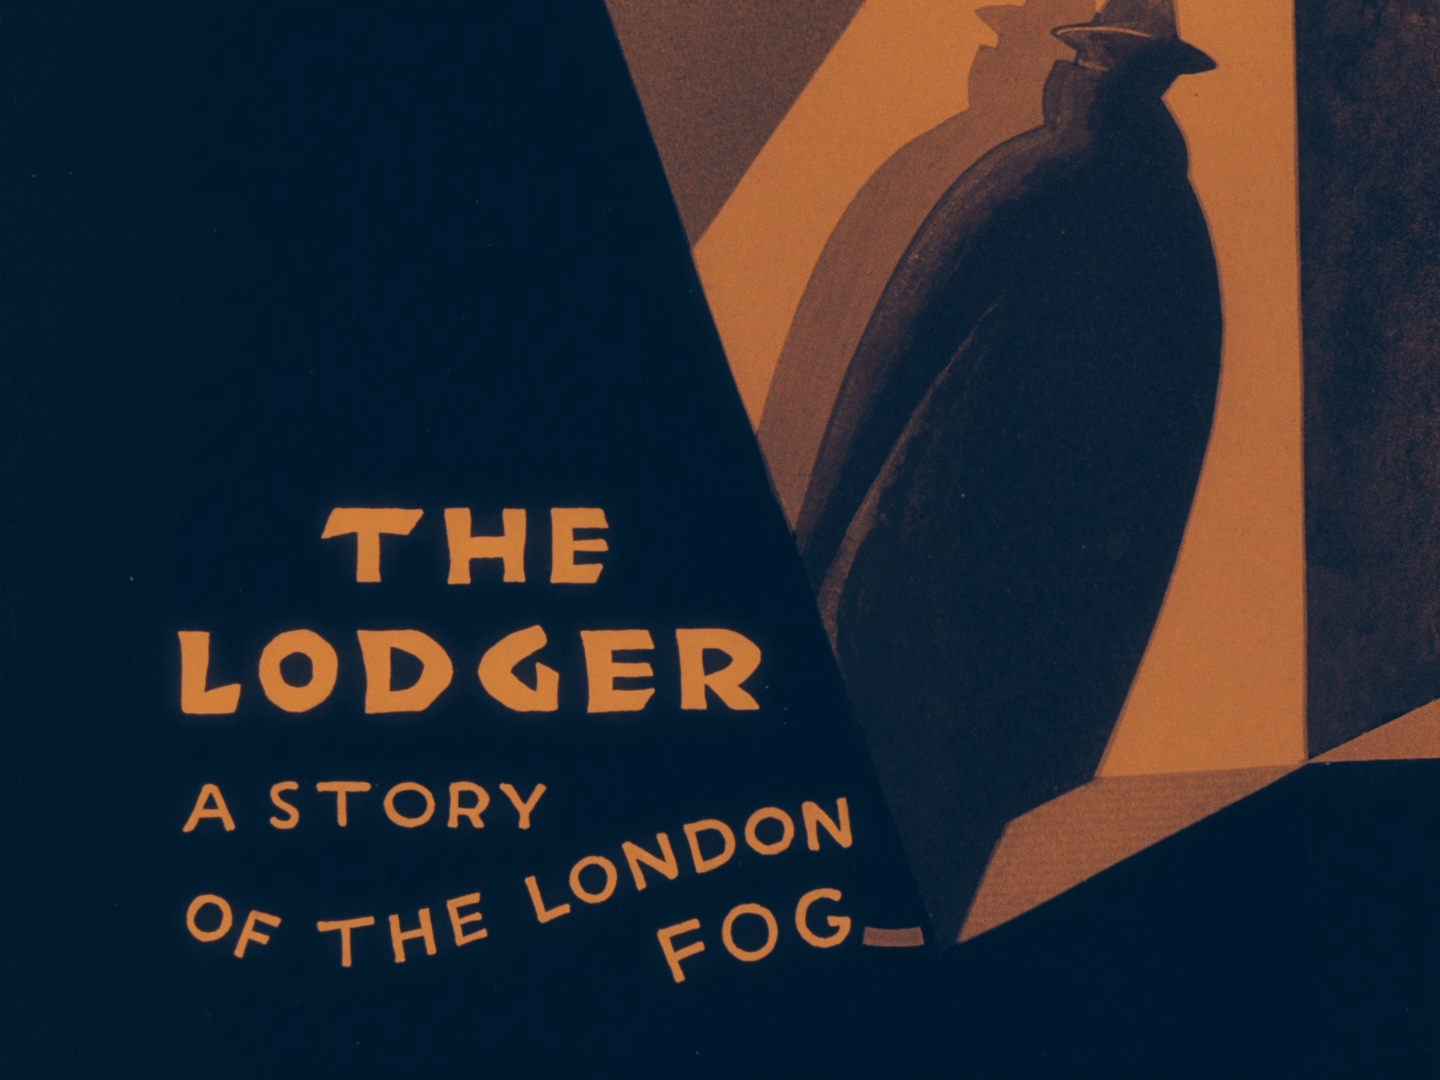 The Lodger (1926, dir. Alfred Hitchcock) UK Network Blu-ray, restored version 3